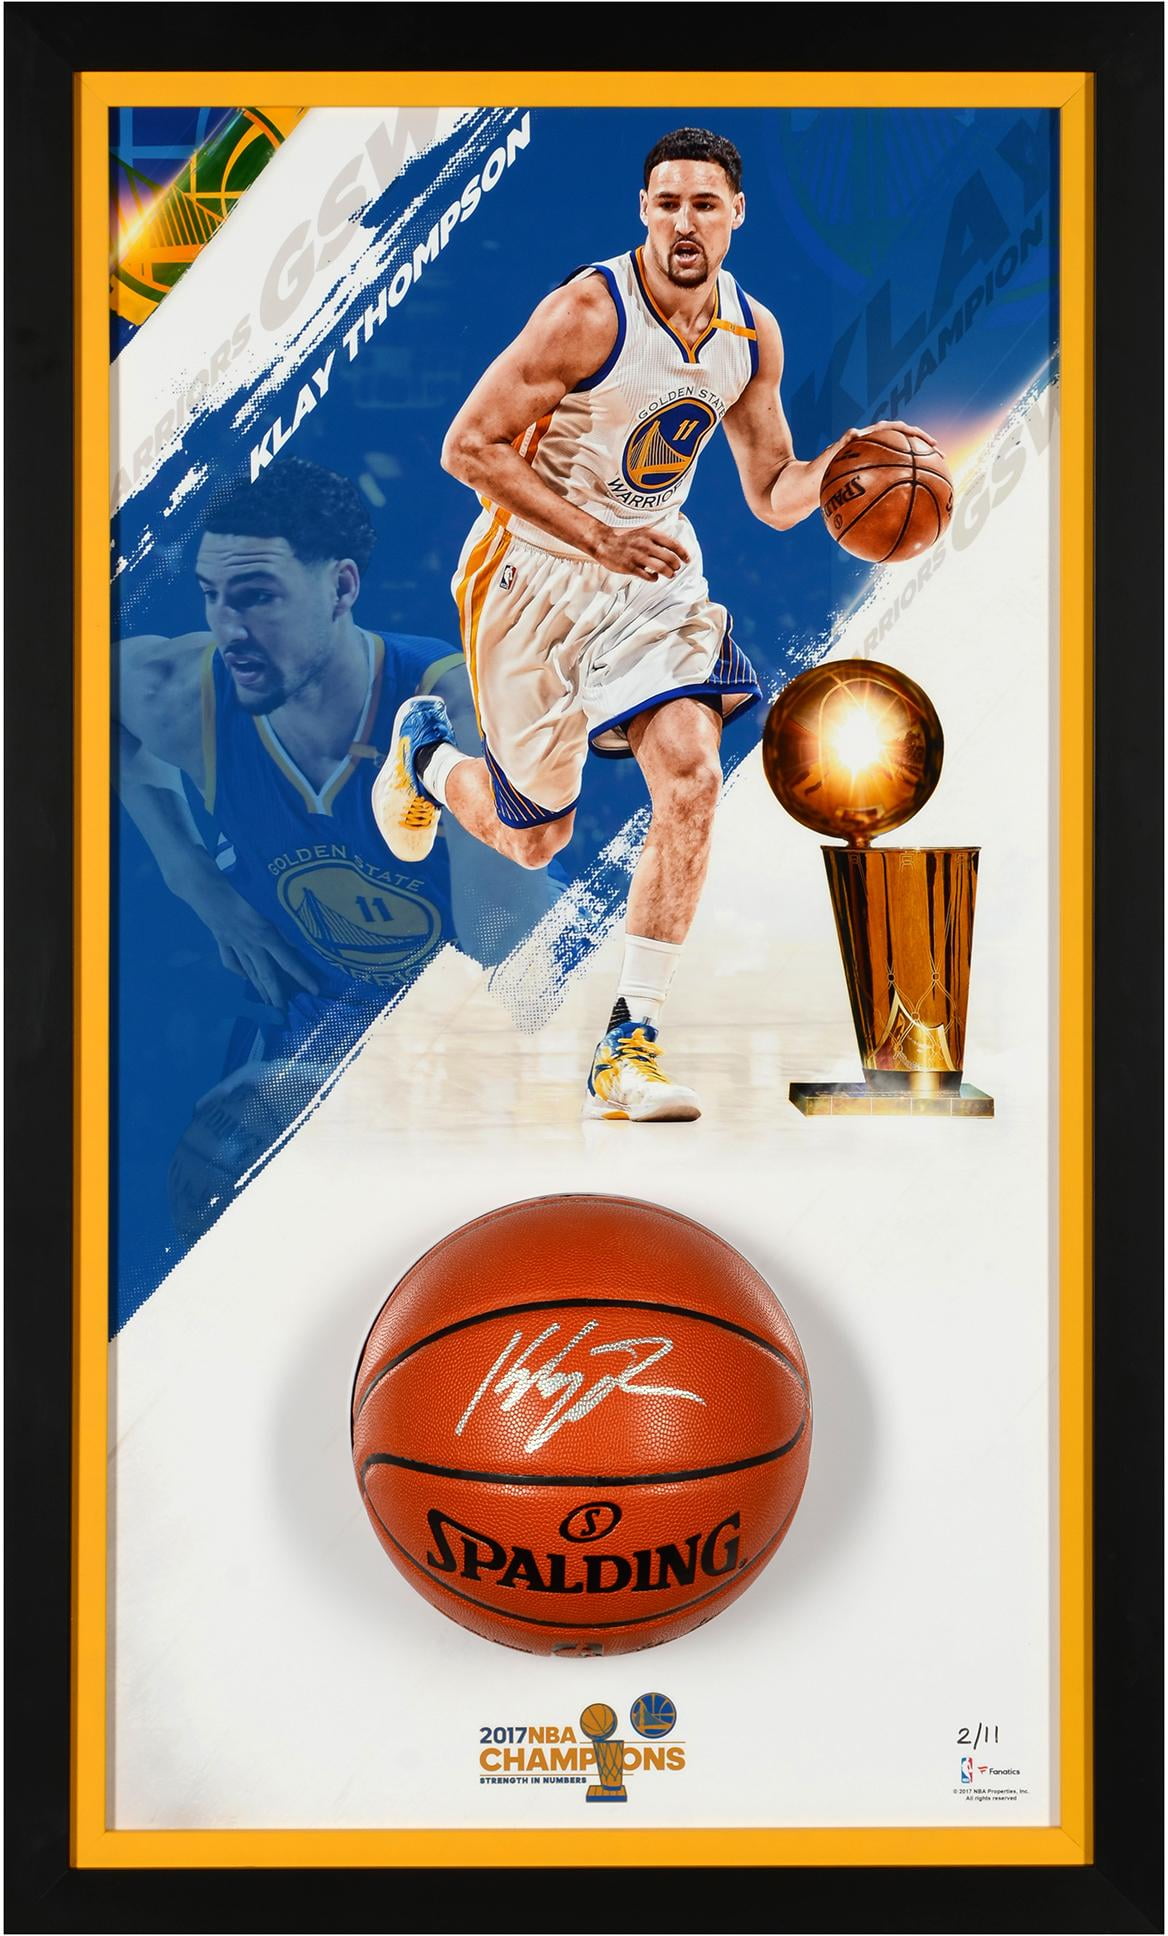 klay thompson autographed jersey